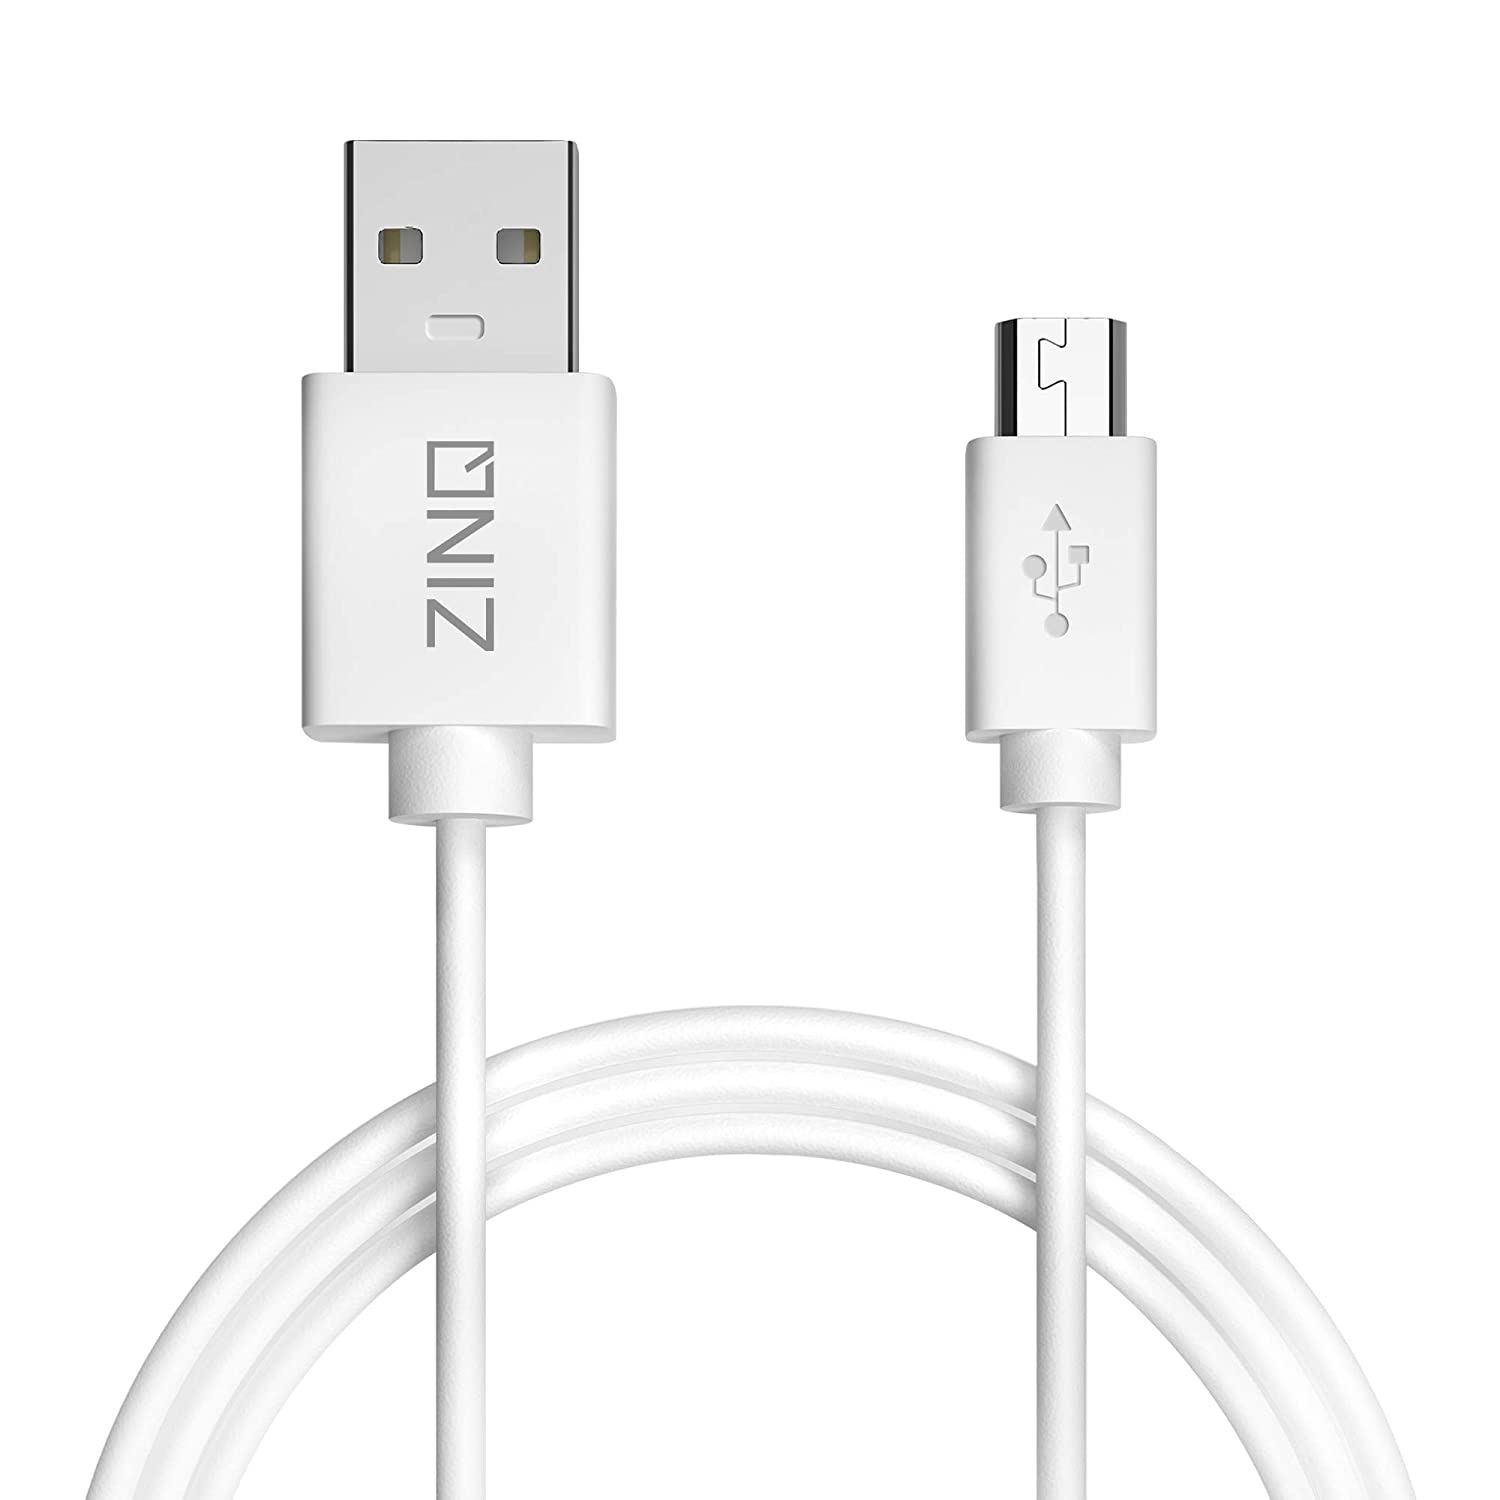 Buy Zinq Technologies Super Durable Micro to USB 2.0 Round Cable with High Speed Charging, Quick Data Sync and PVC Connectors for All USB Powered Devices (White)